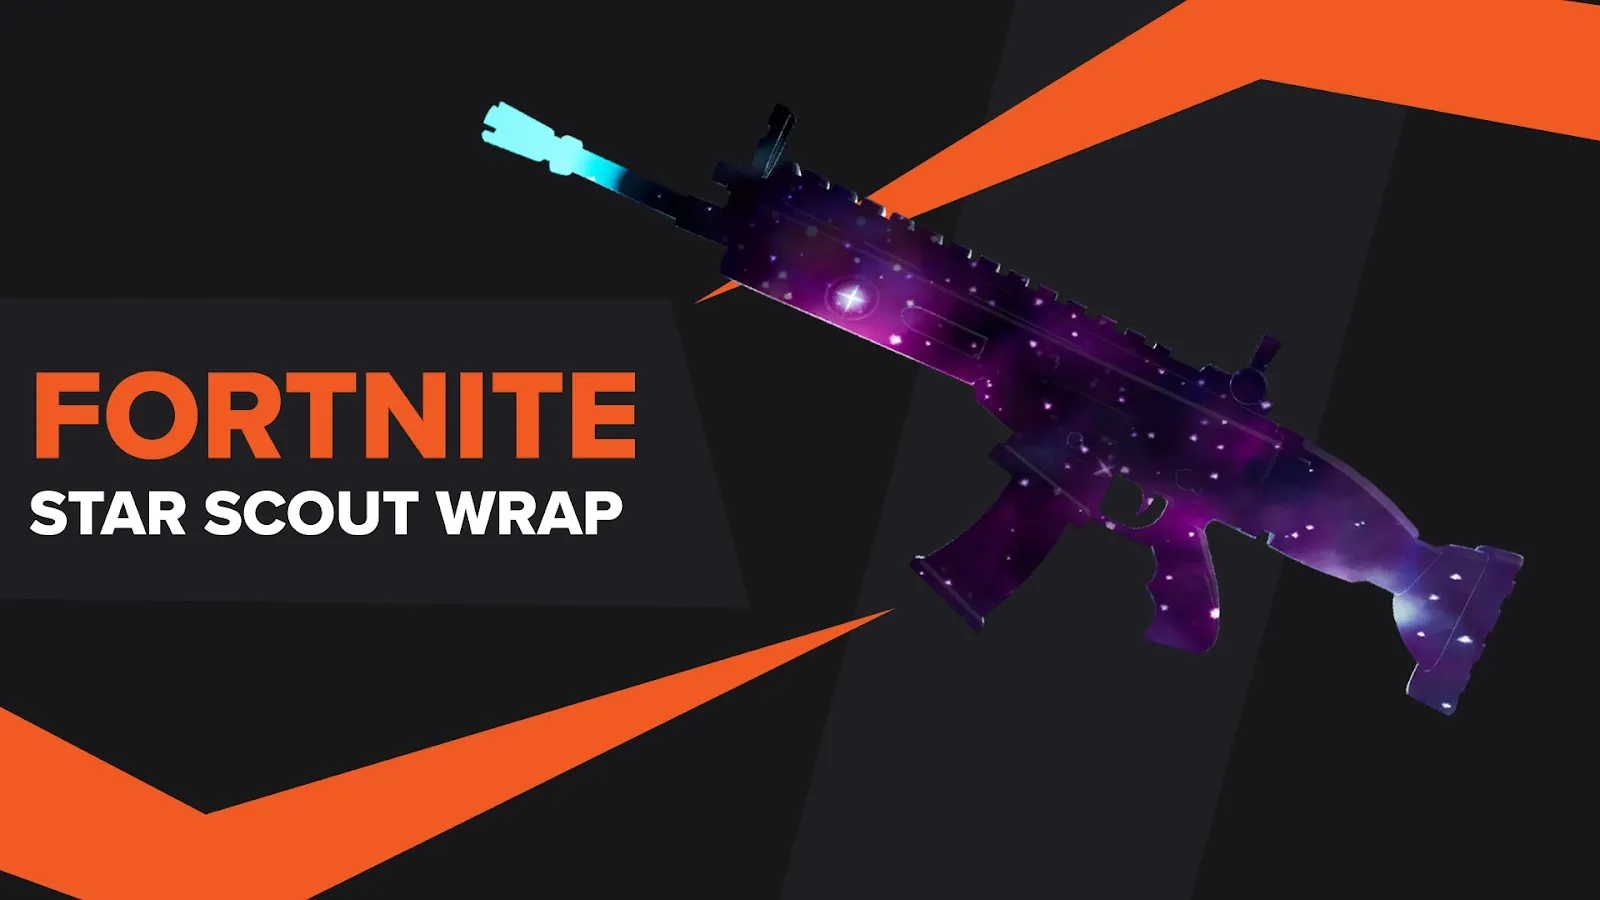 Star Scout Weapon Wrap Fortnite